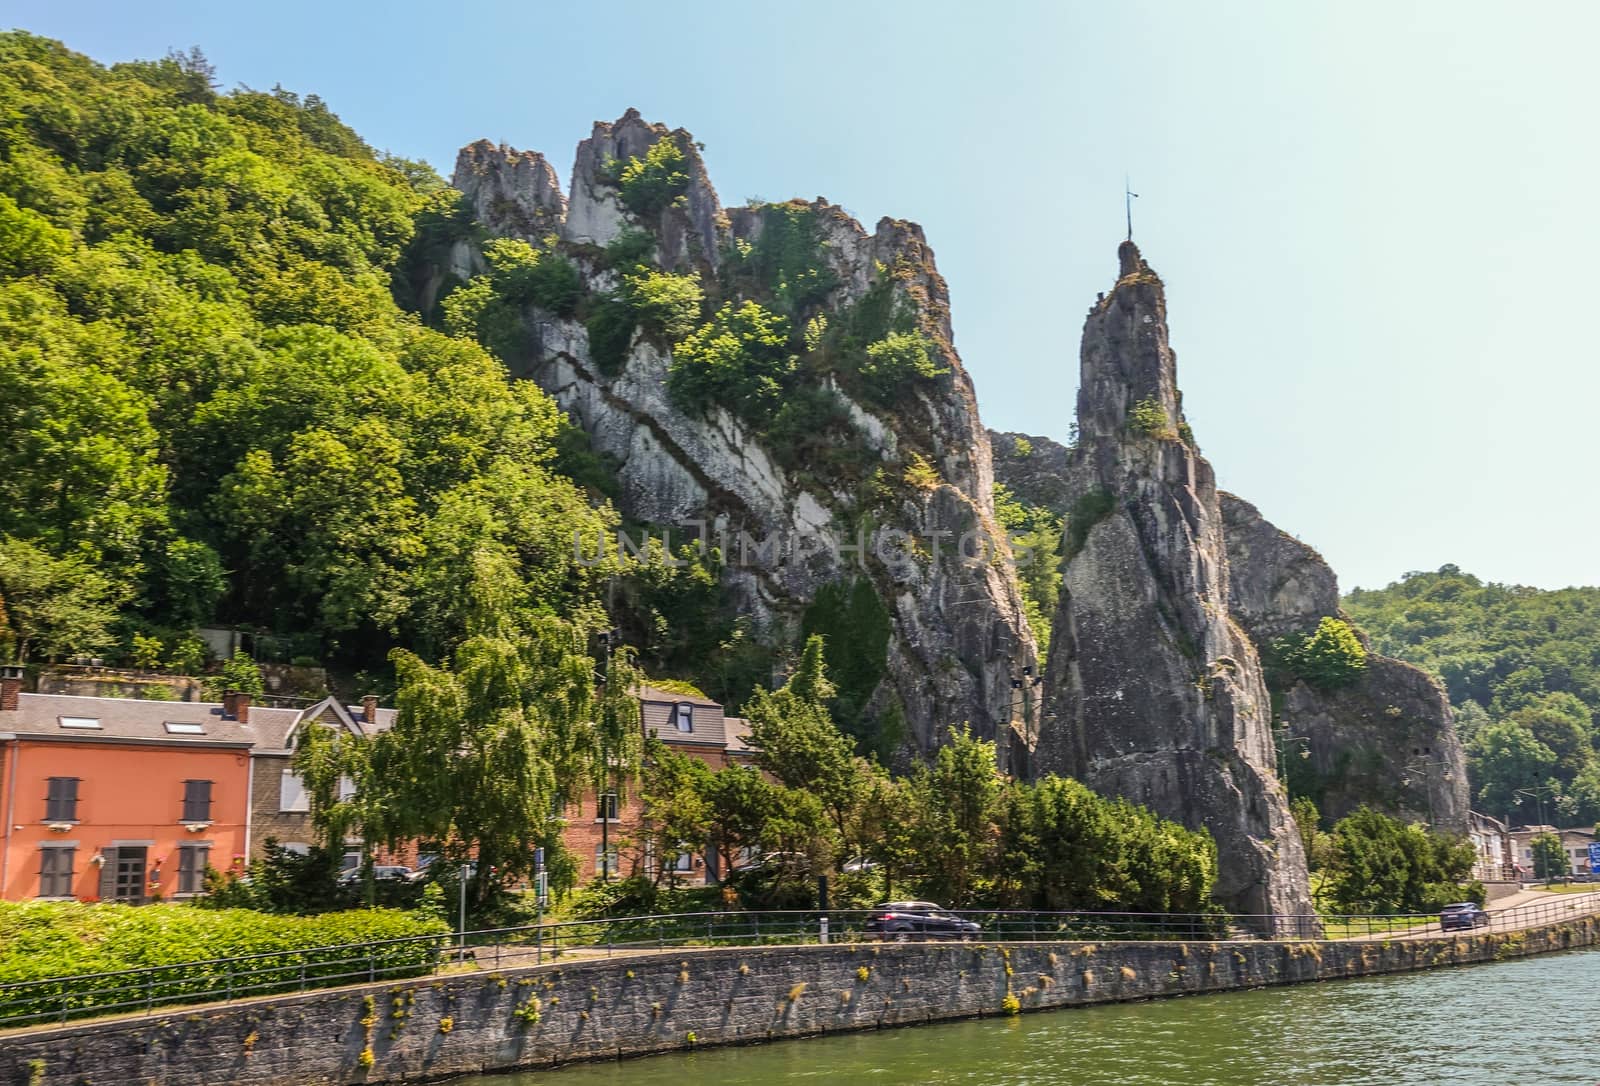 North side of Le rocher Bayard along Meuse River in Dinant, Belg by Claudine